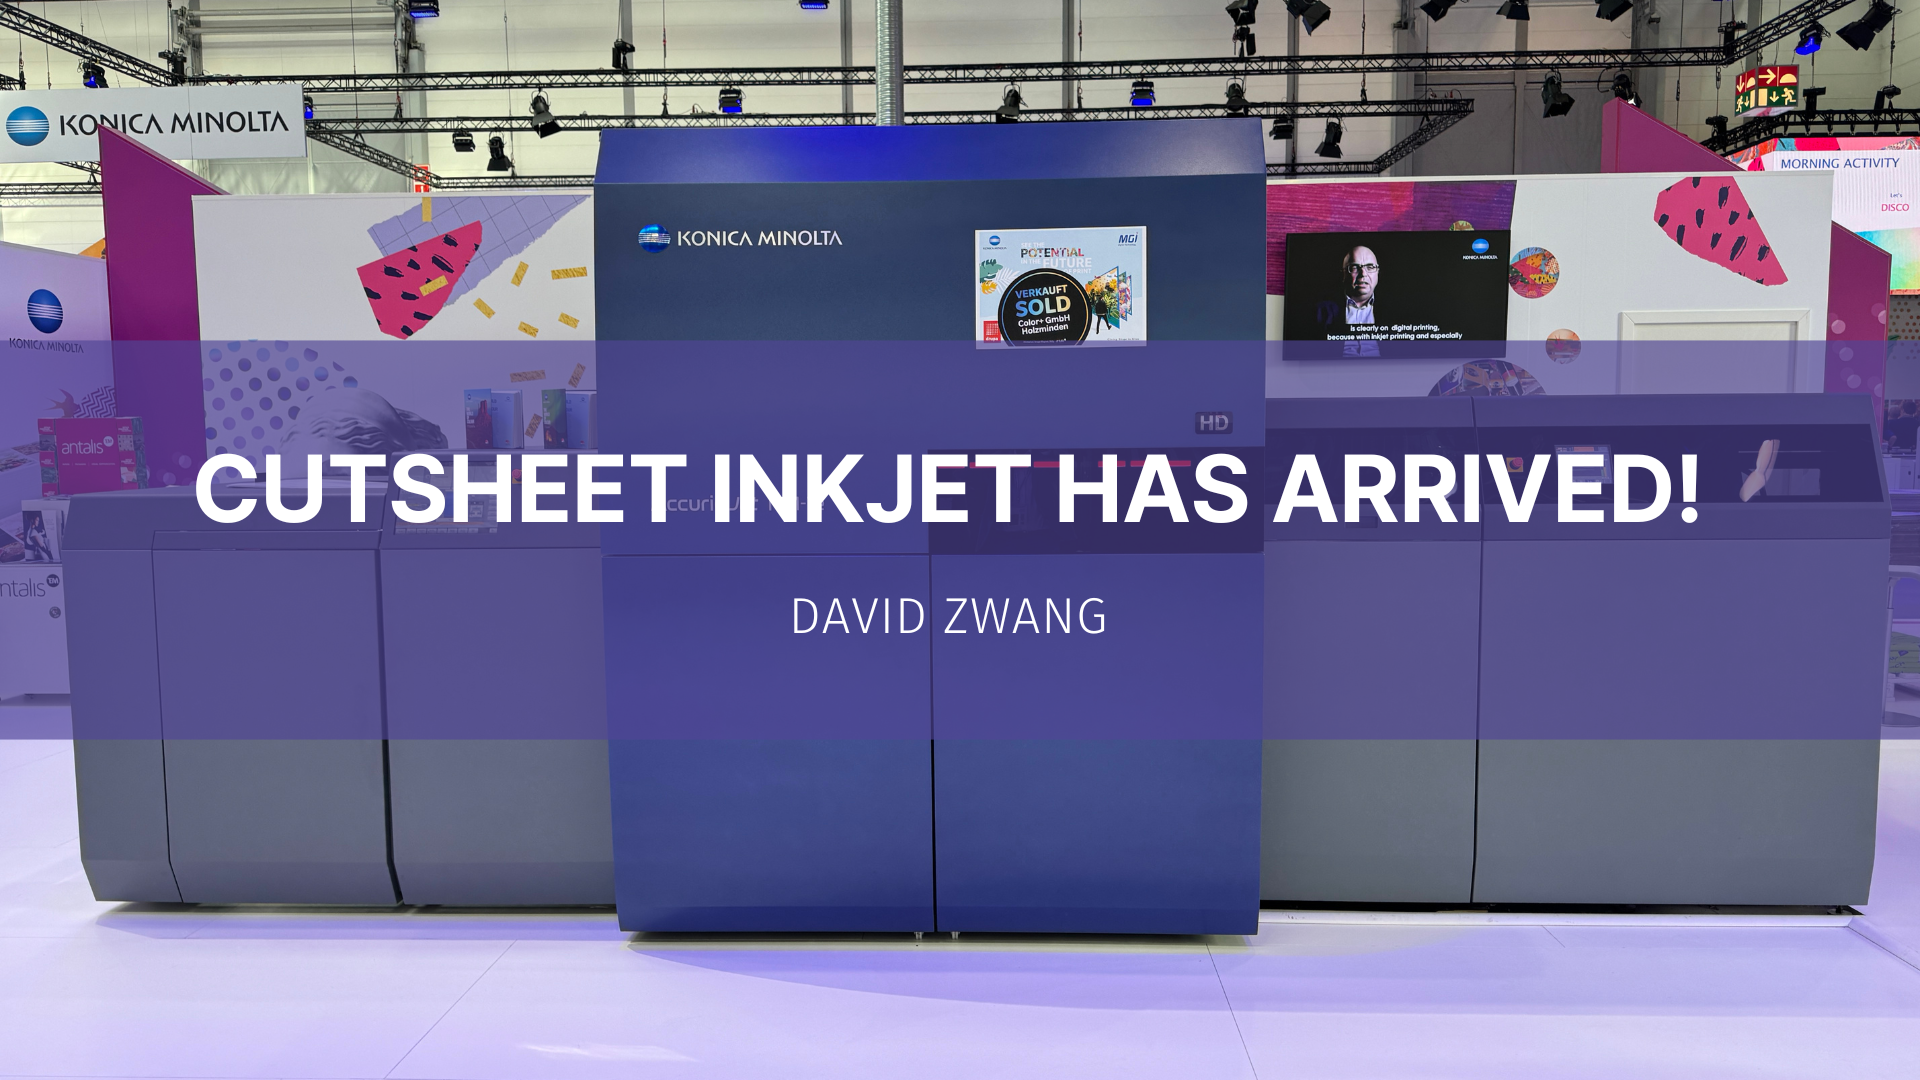 Featured image for “Cutsheet Inkjet Has Arrived!”